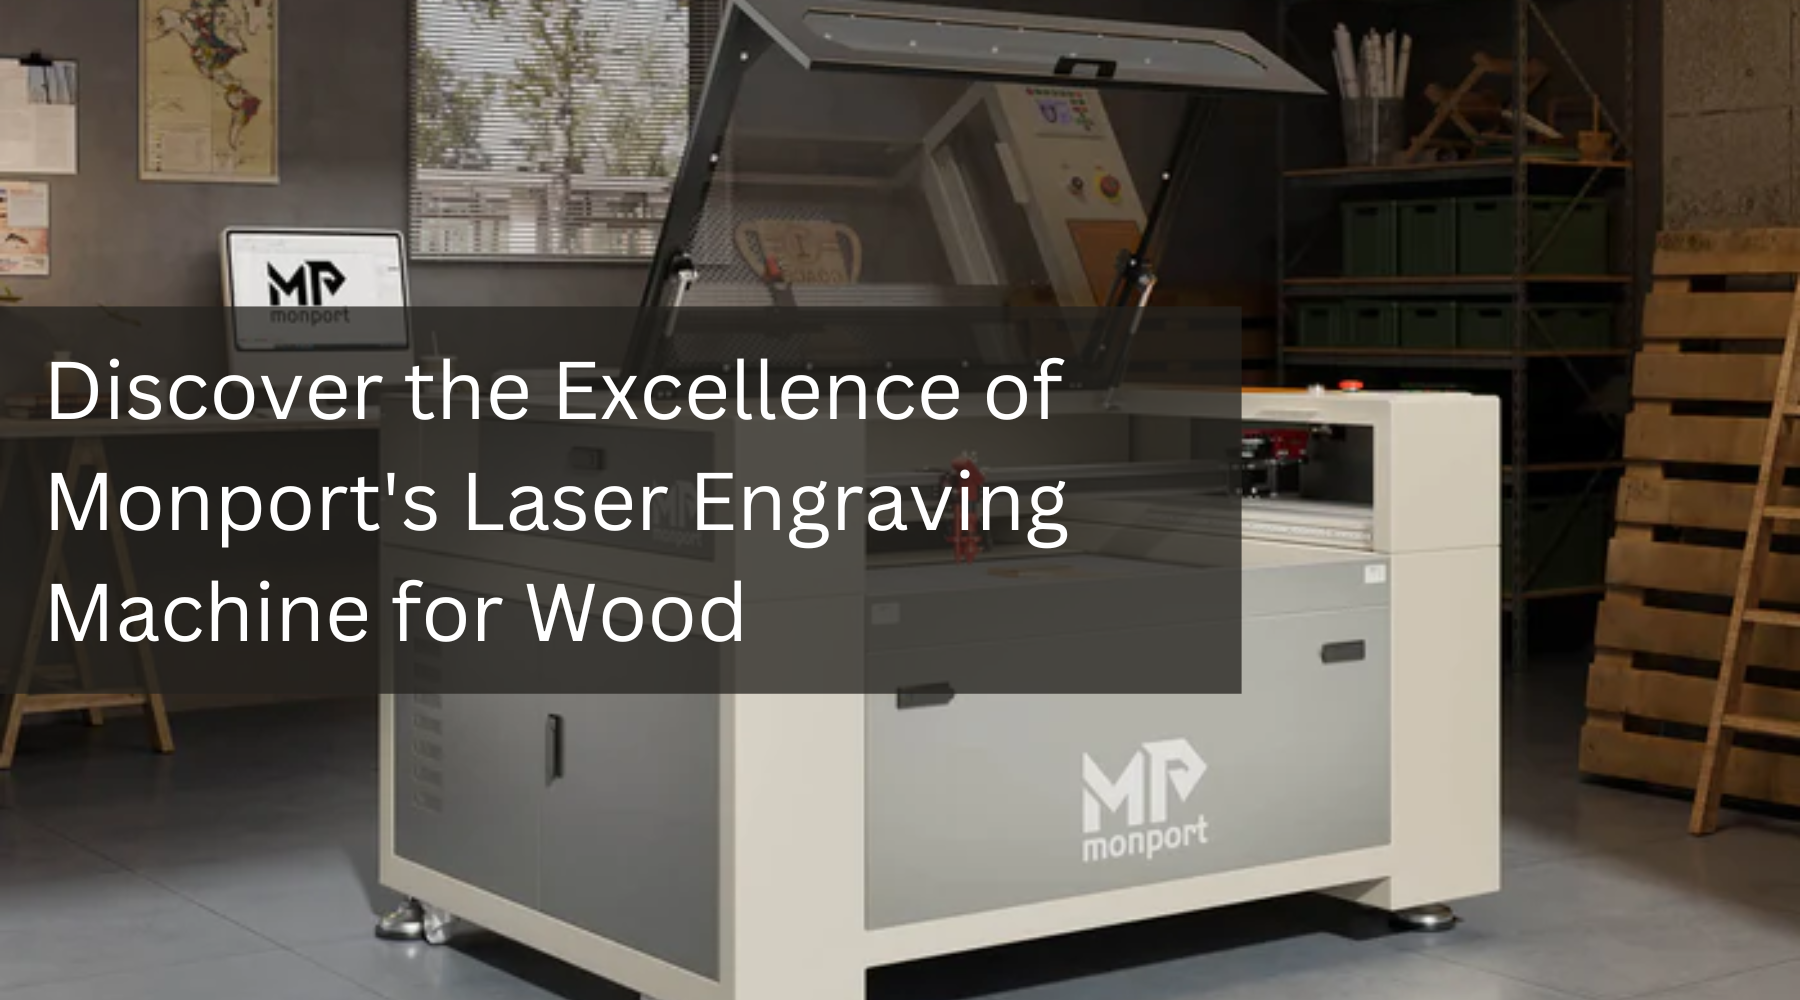 Discover the Excellence of Laser Engraving Machine for Wood